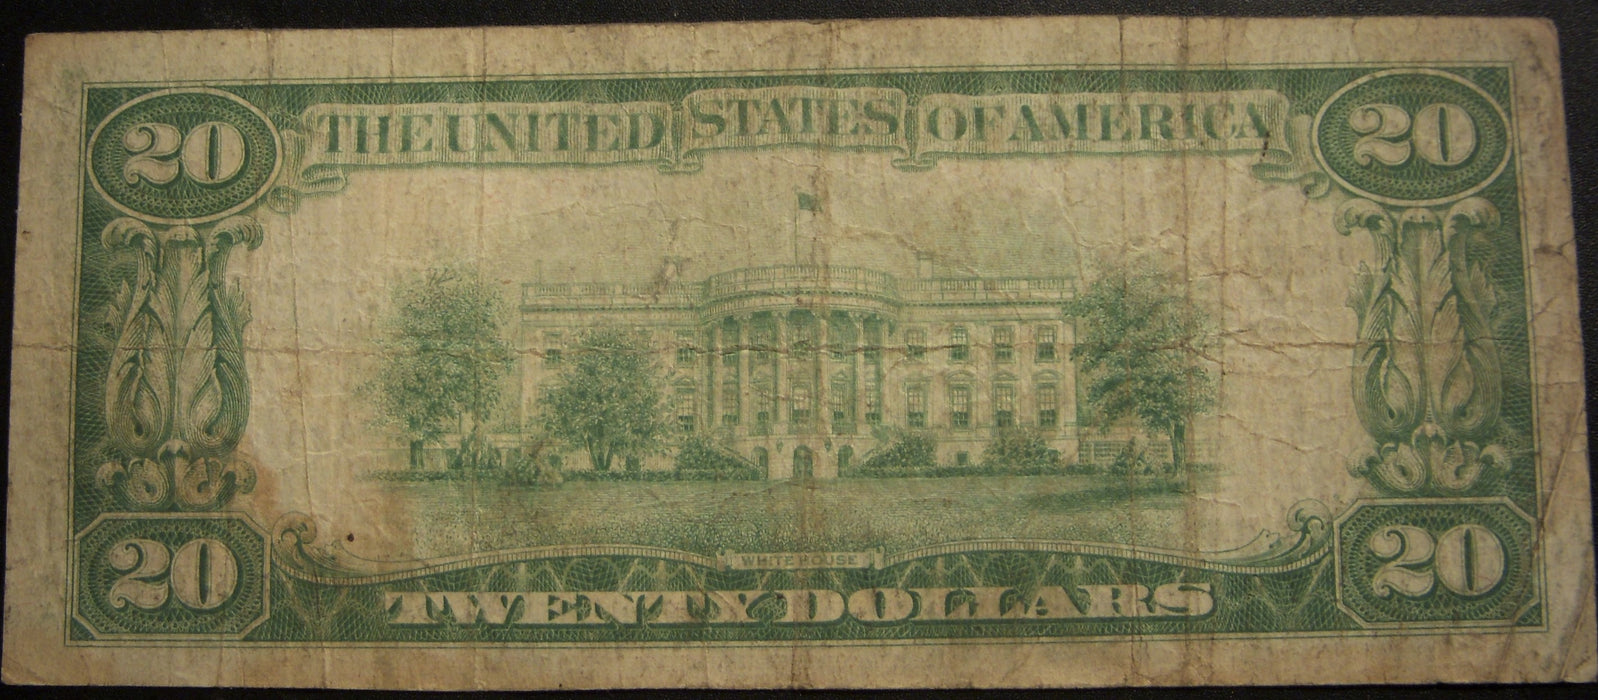 1929 $20 National Bank Note - Seymour. IN Bank# 4652